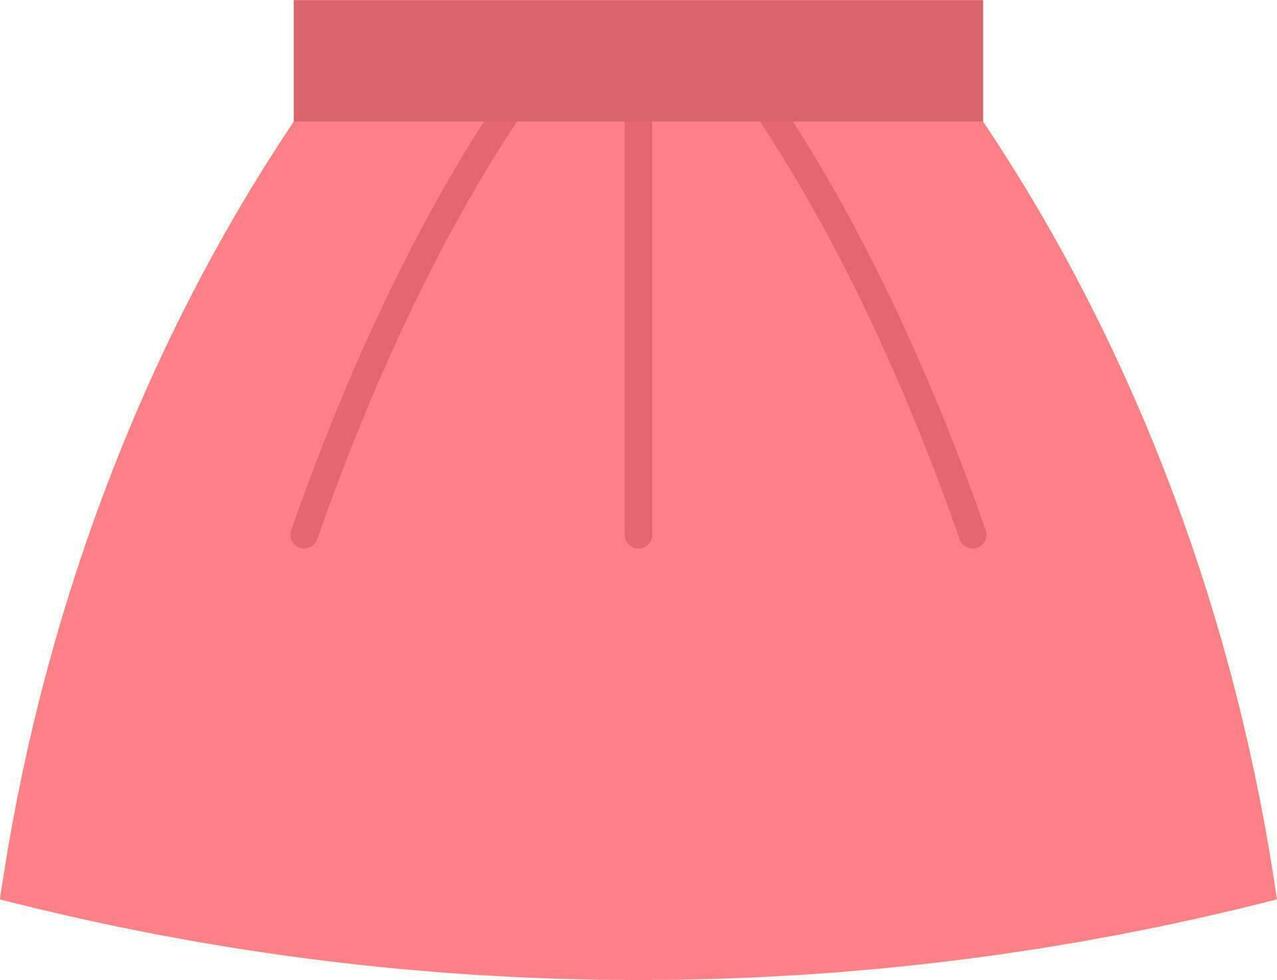 Skirt icon vector image. Suitable for mobile apps, web apps and print media.